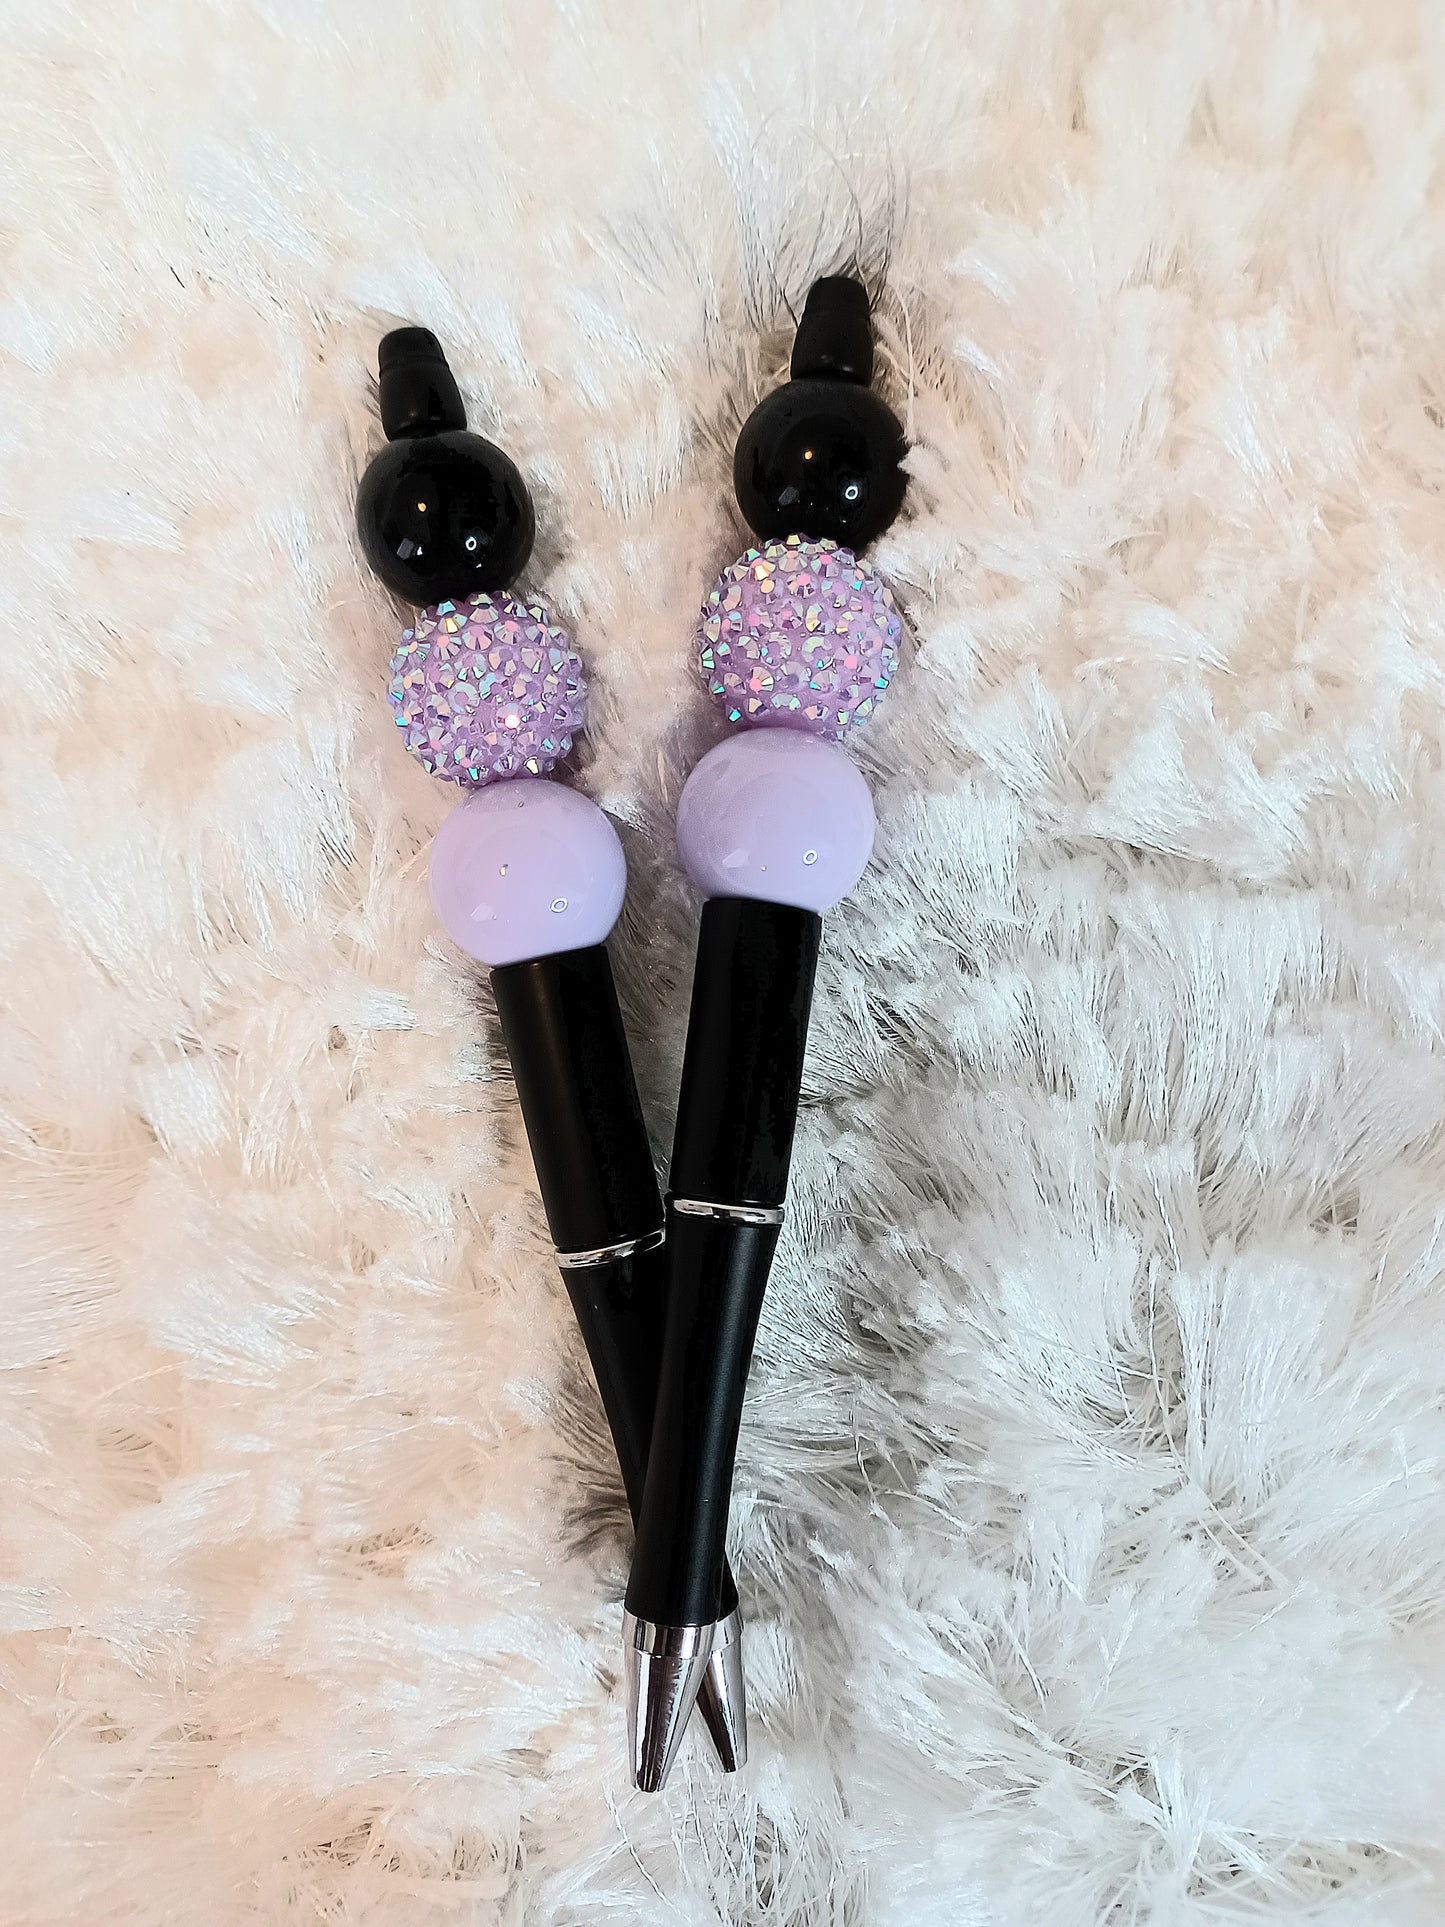 Lilac and Black Ink Pen For Women Stationery For Girls Stationery Cute Pen